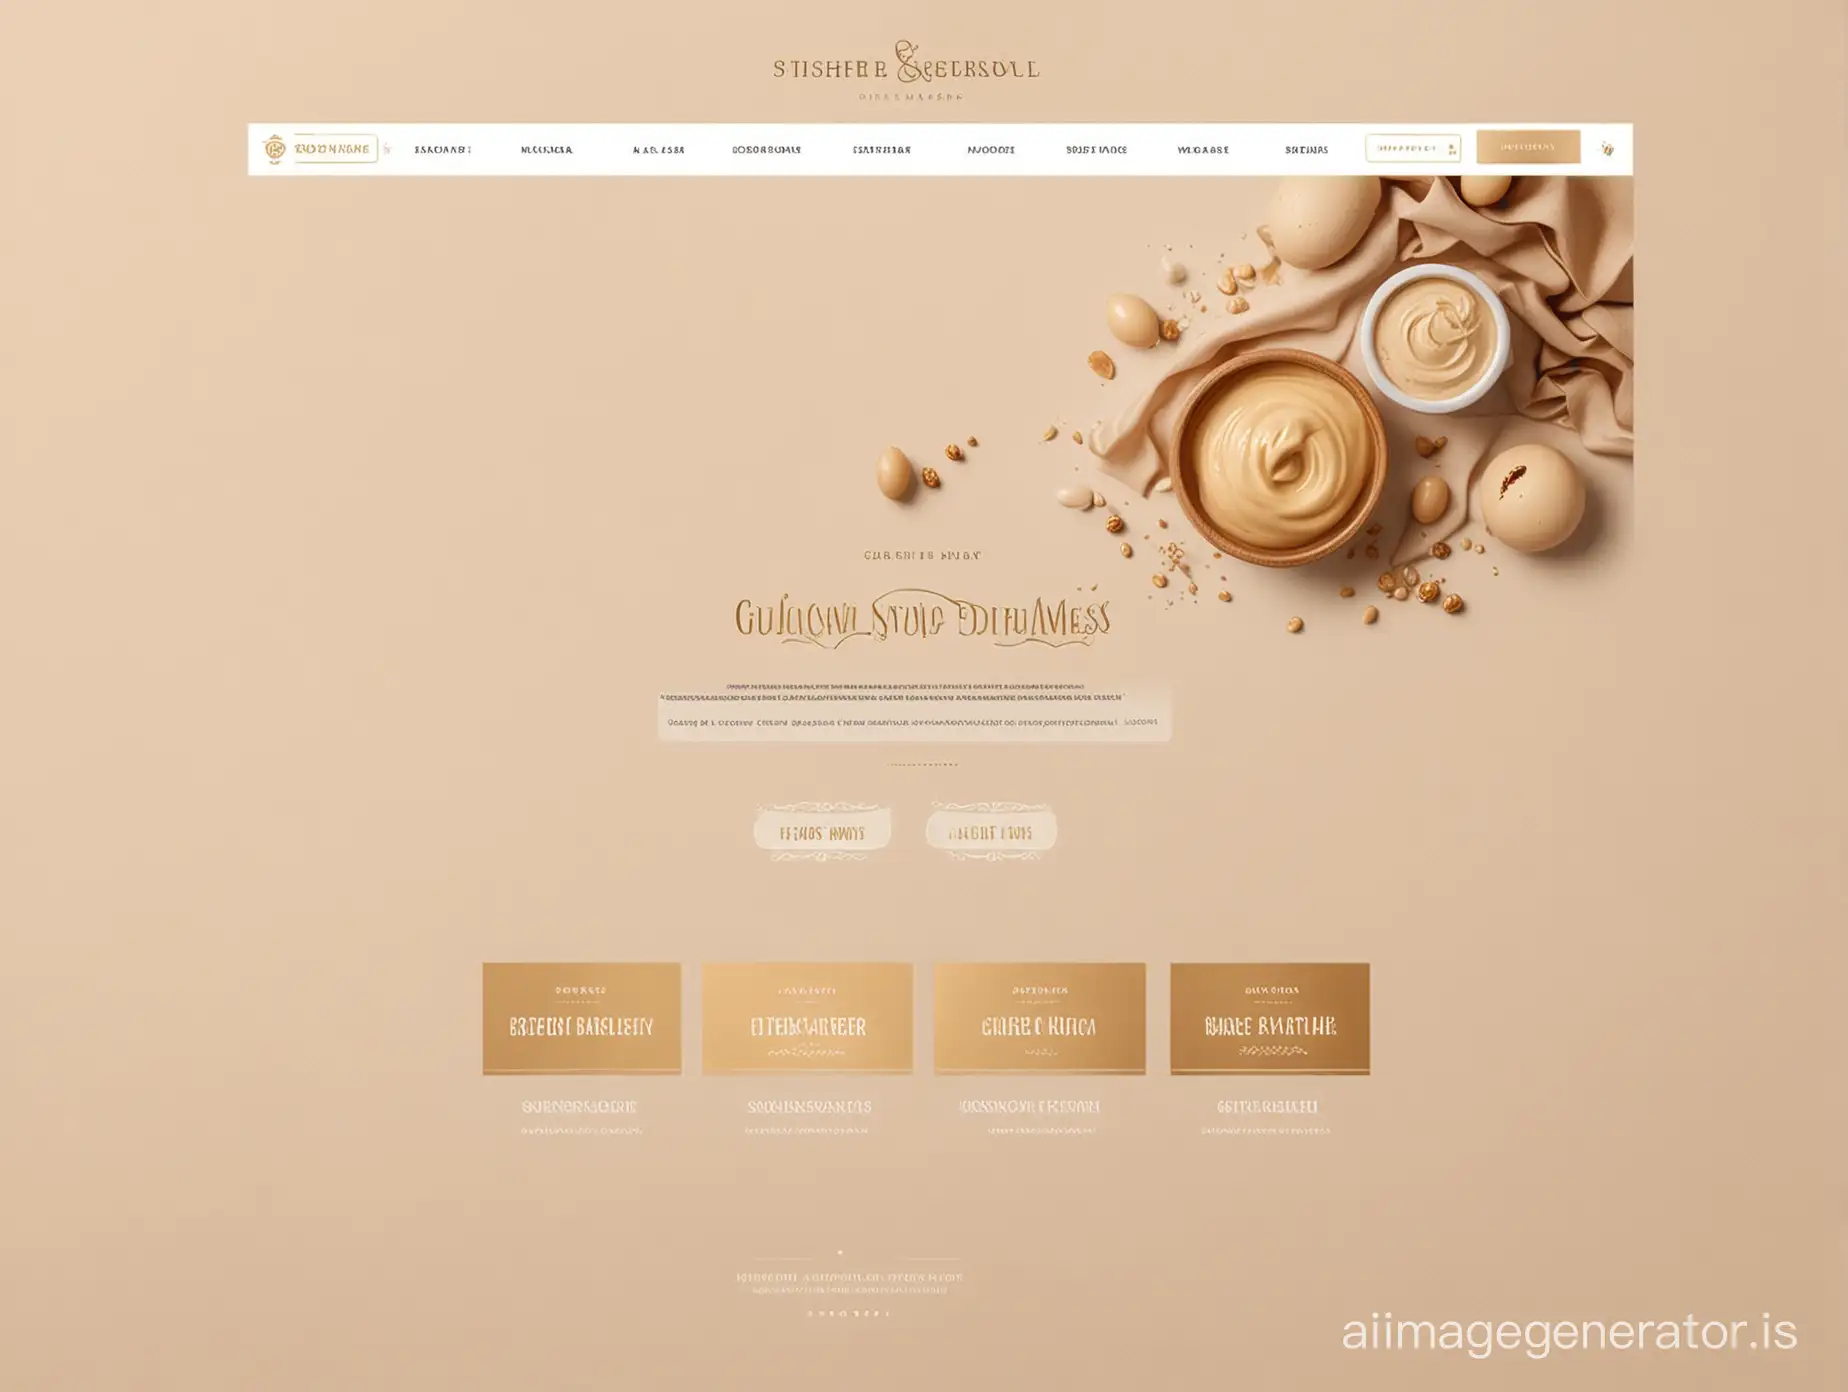 Elegant-Beauty-and-Wellness-Website-Design-in-White-and-Golden-Beige